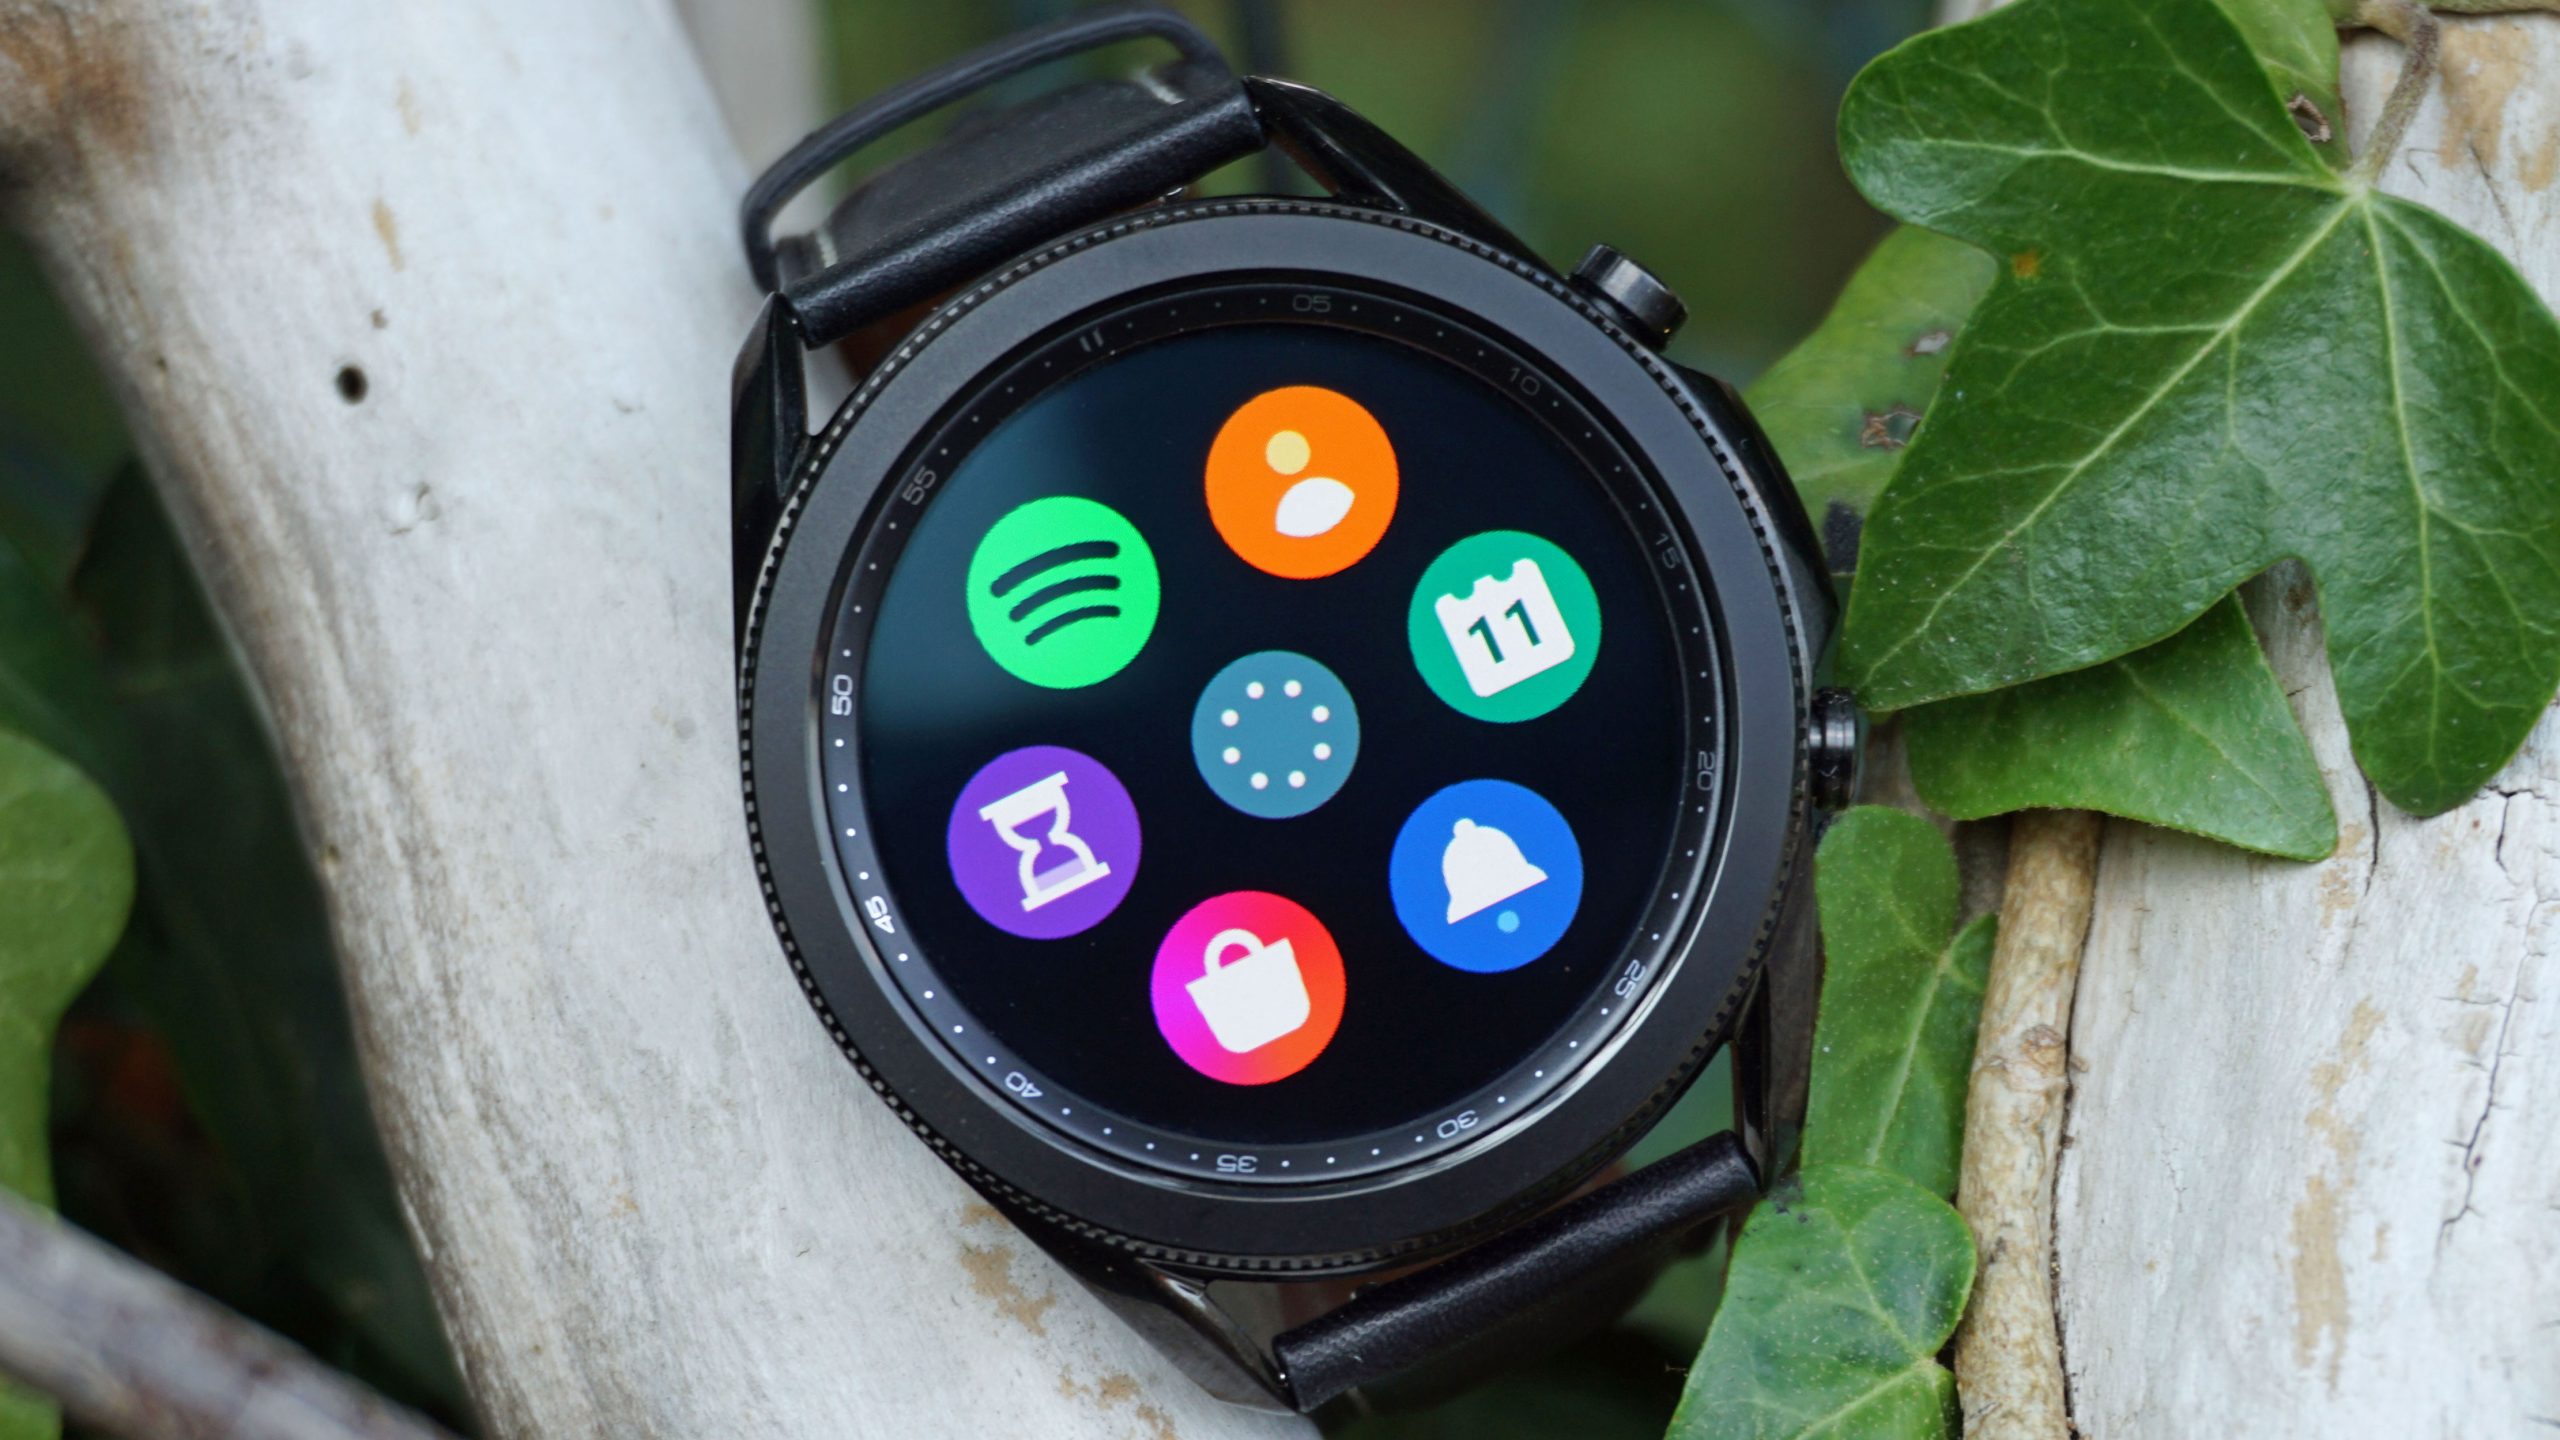 New Galaxy Watch 3 Faces